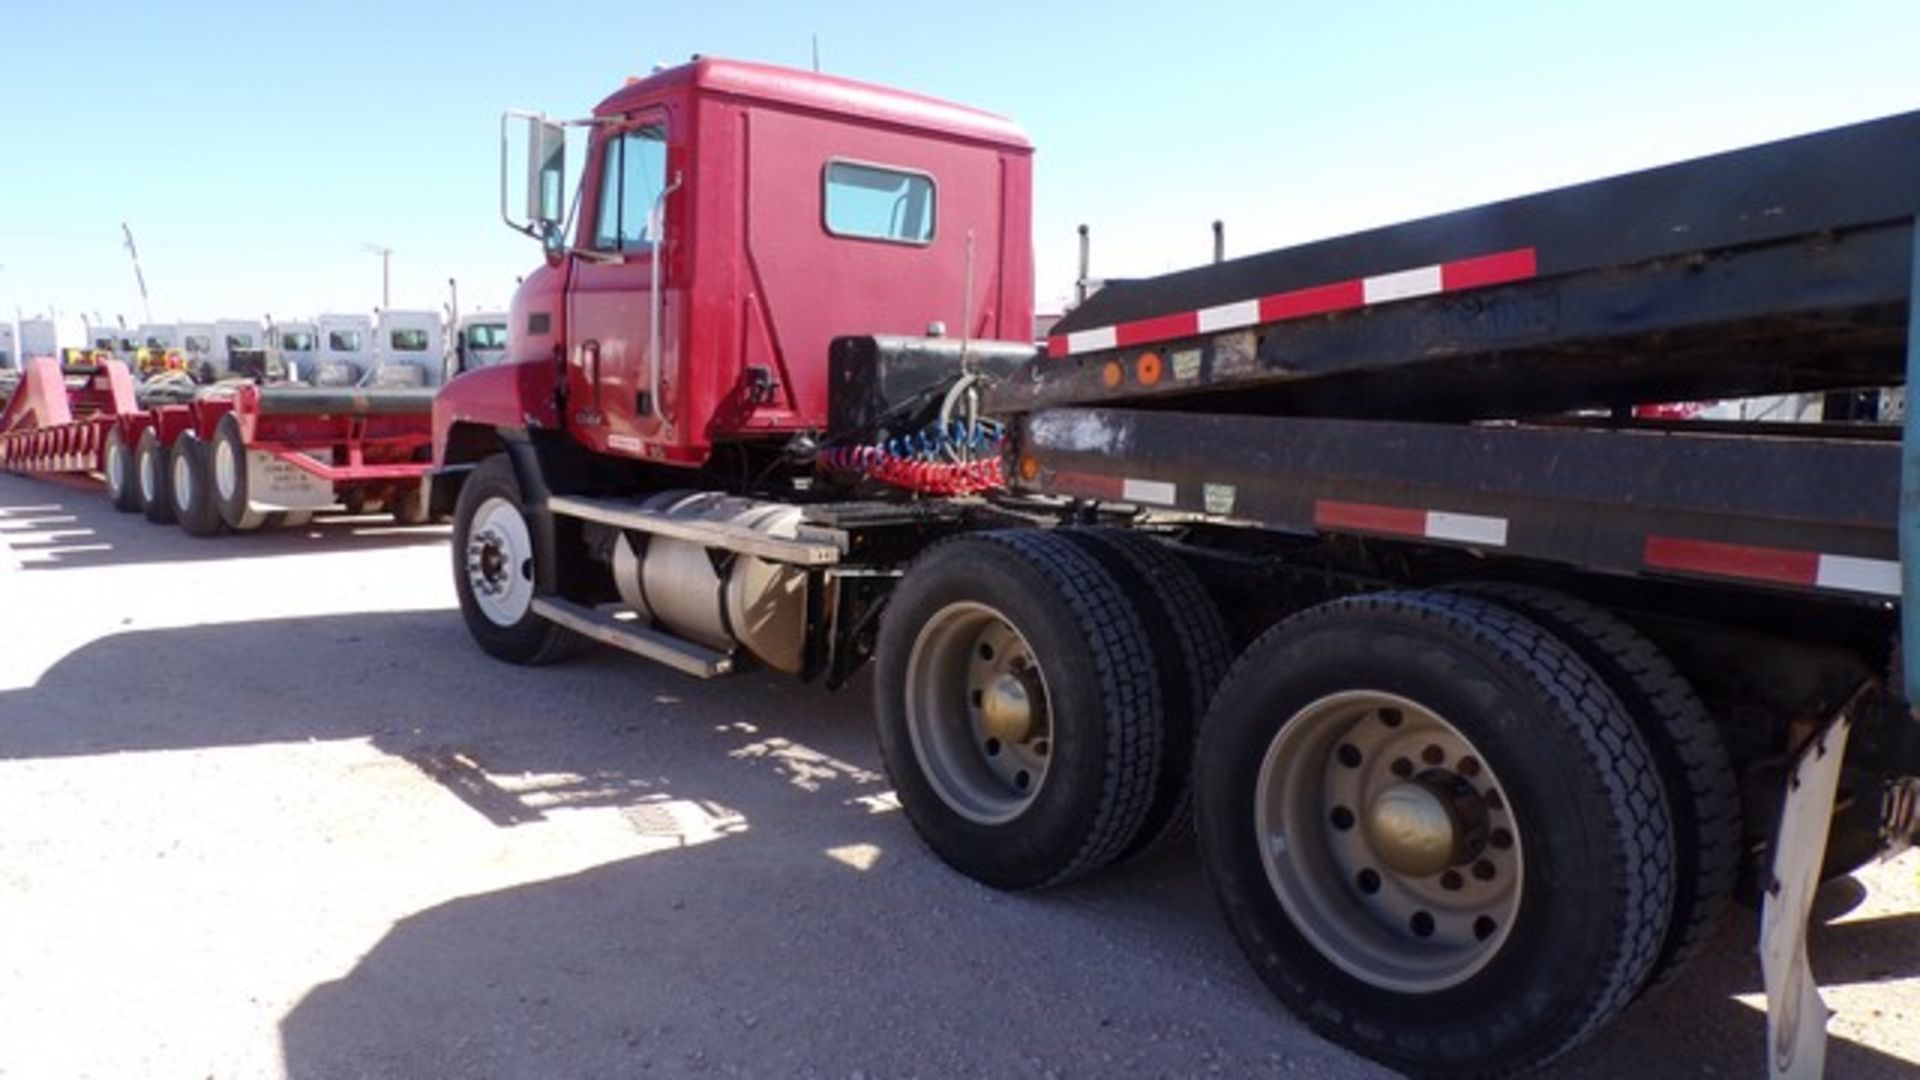 Located in YARD 1 - Midland, TX (6339) 1996 MACK CH613 T/A DAY CAB HAUL TRUCK, VIN- - Image 5 of 9